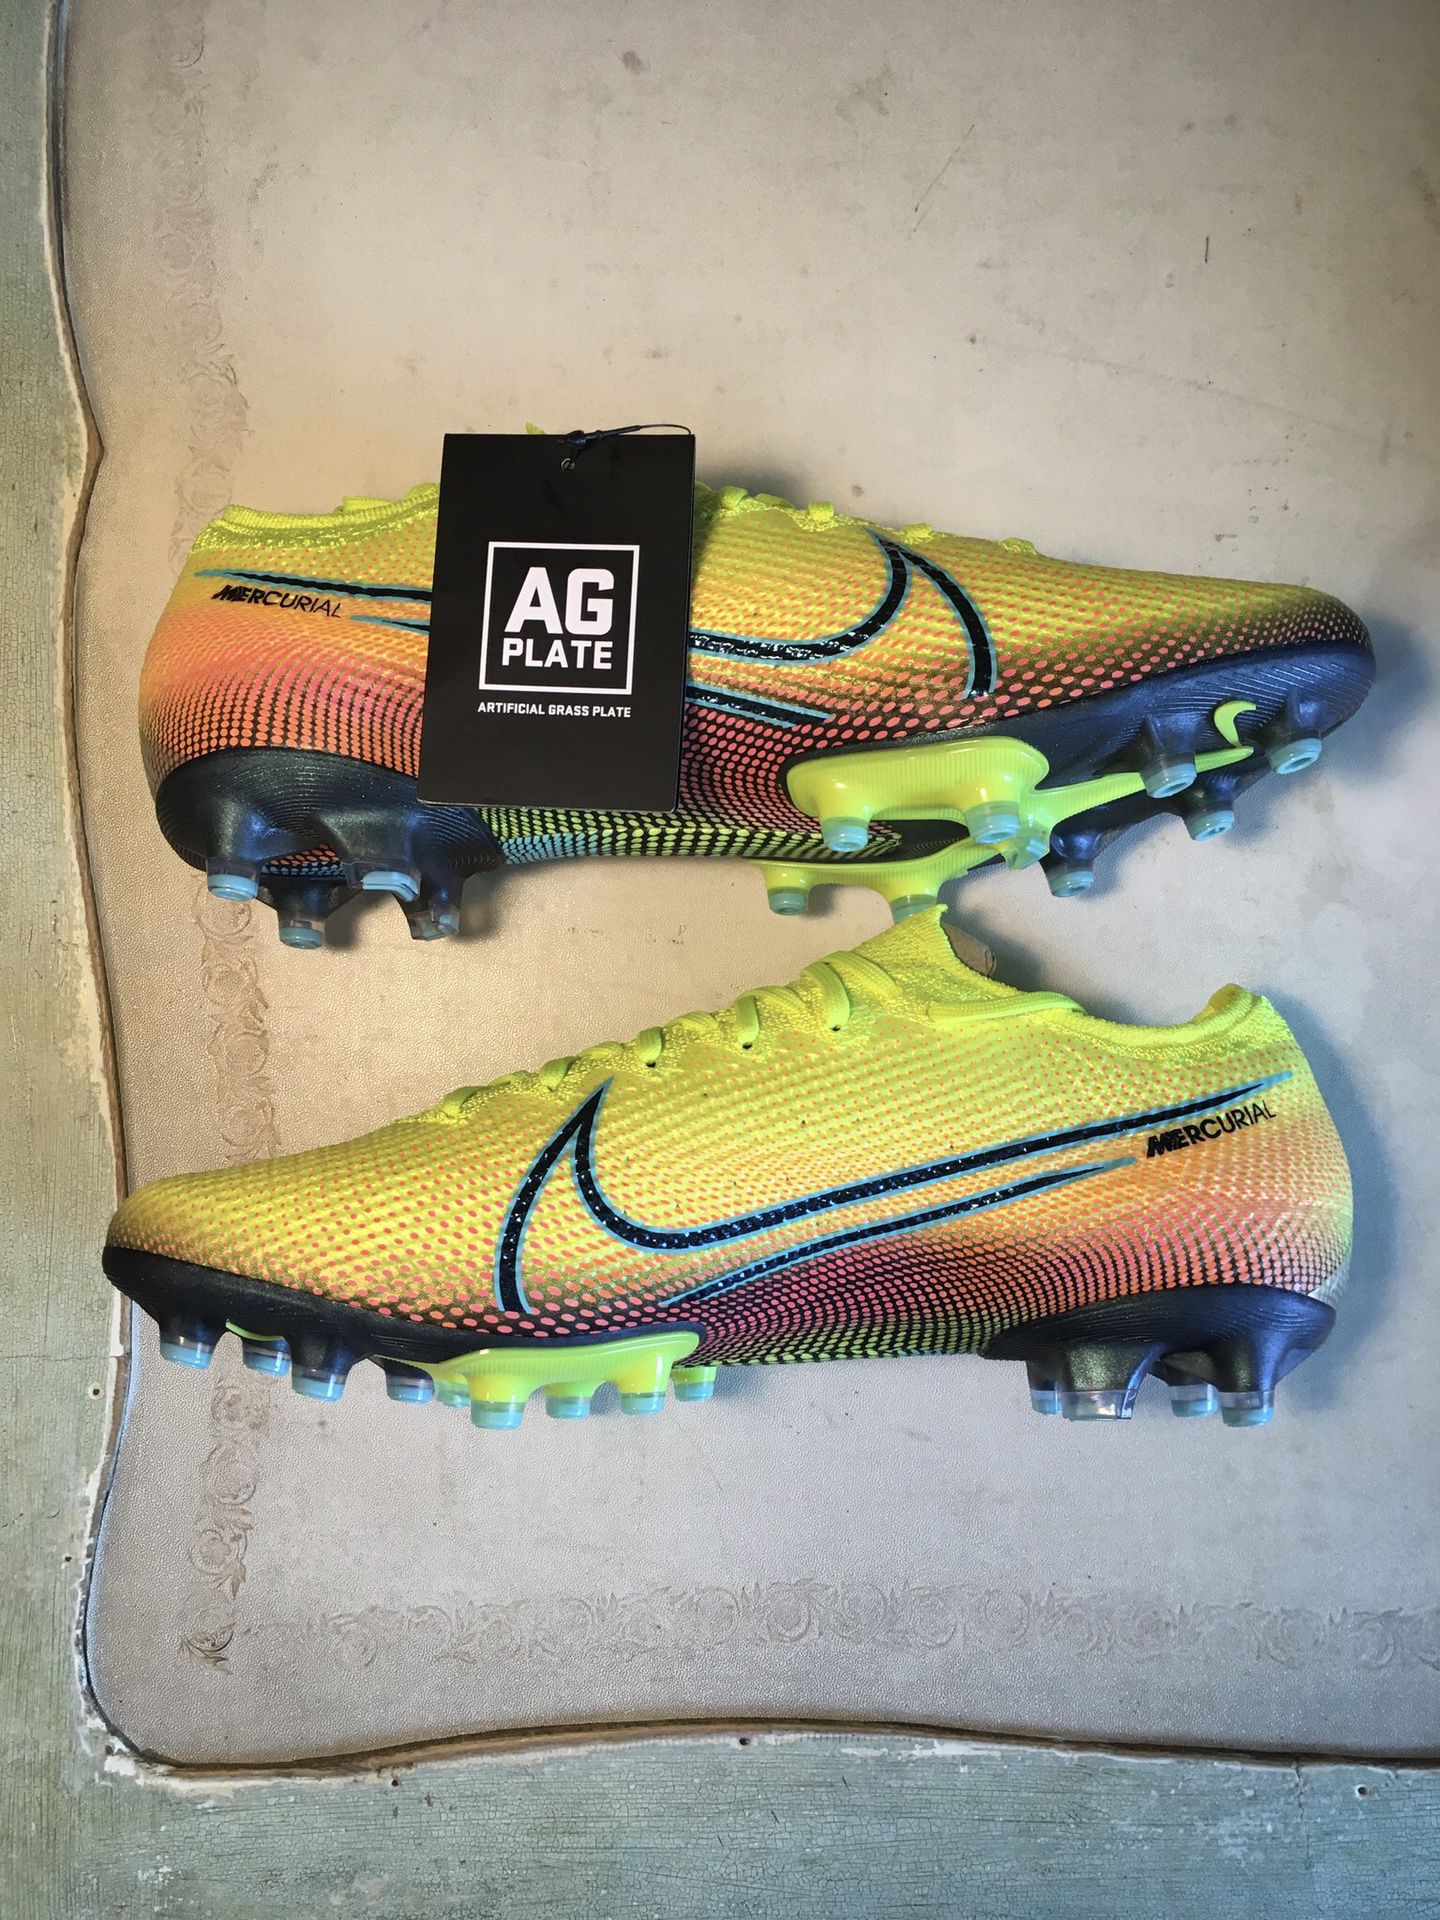 Nike Mercurial Vapor 13 Elite MDS 2 AG artificial grass soccer cleats -  size 9 for Sale in Seattle, WA - OfferUp